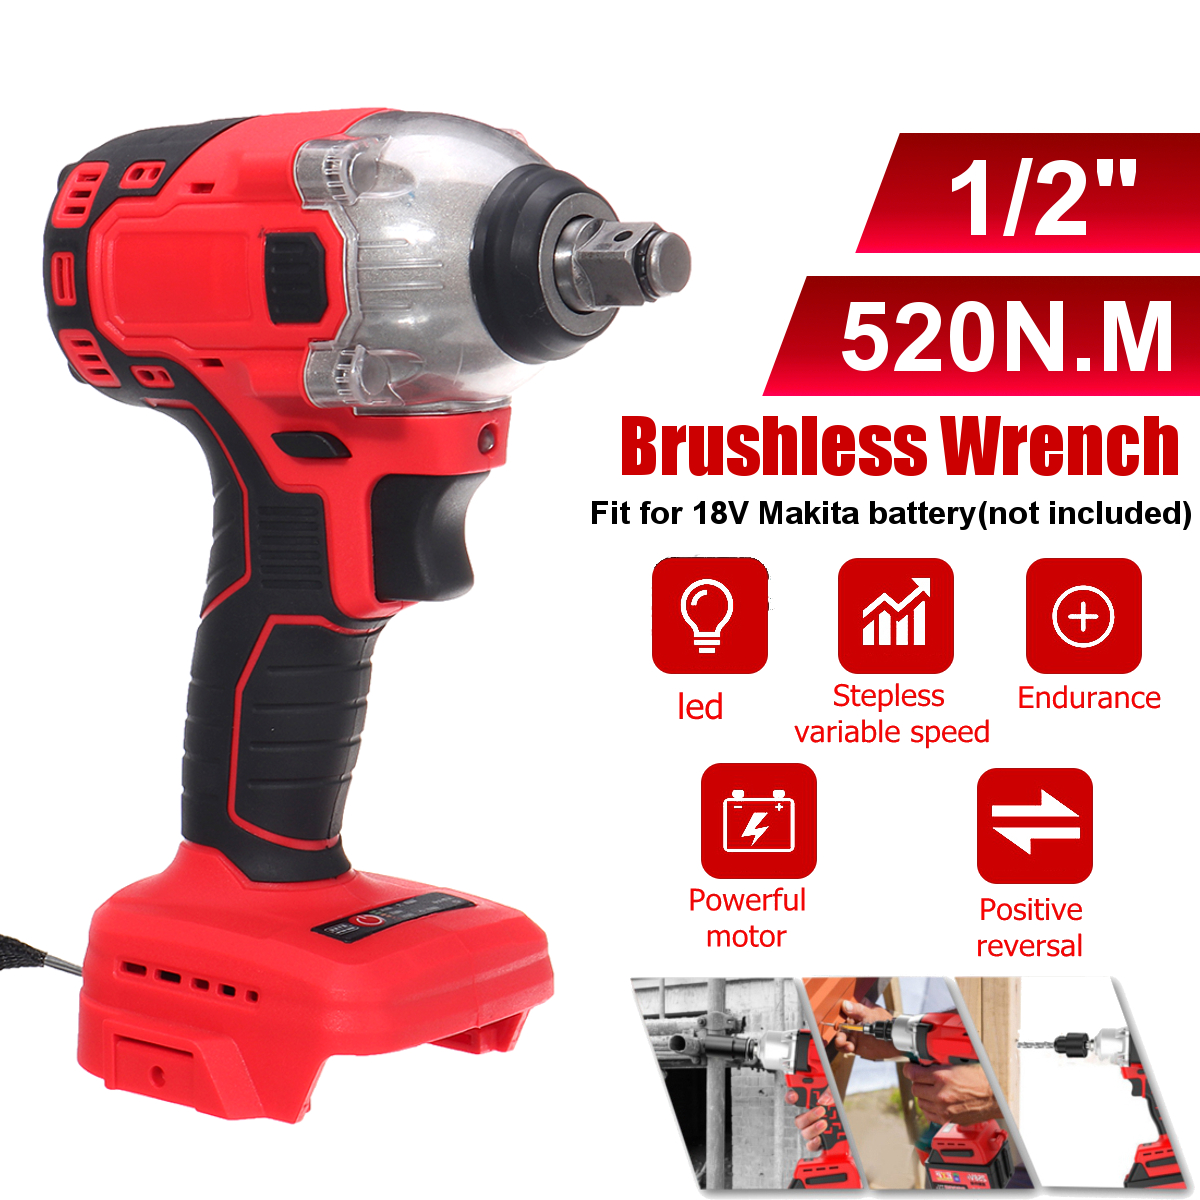 520Nm-12-Cordless-Brushless-Impact-Wrench-Power-Driver-Electric-Wrench-For-Makita-18V-Battery-1749248-1